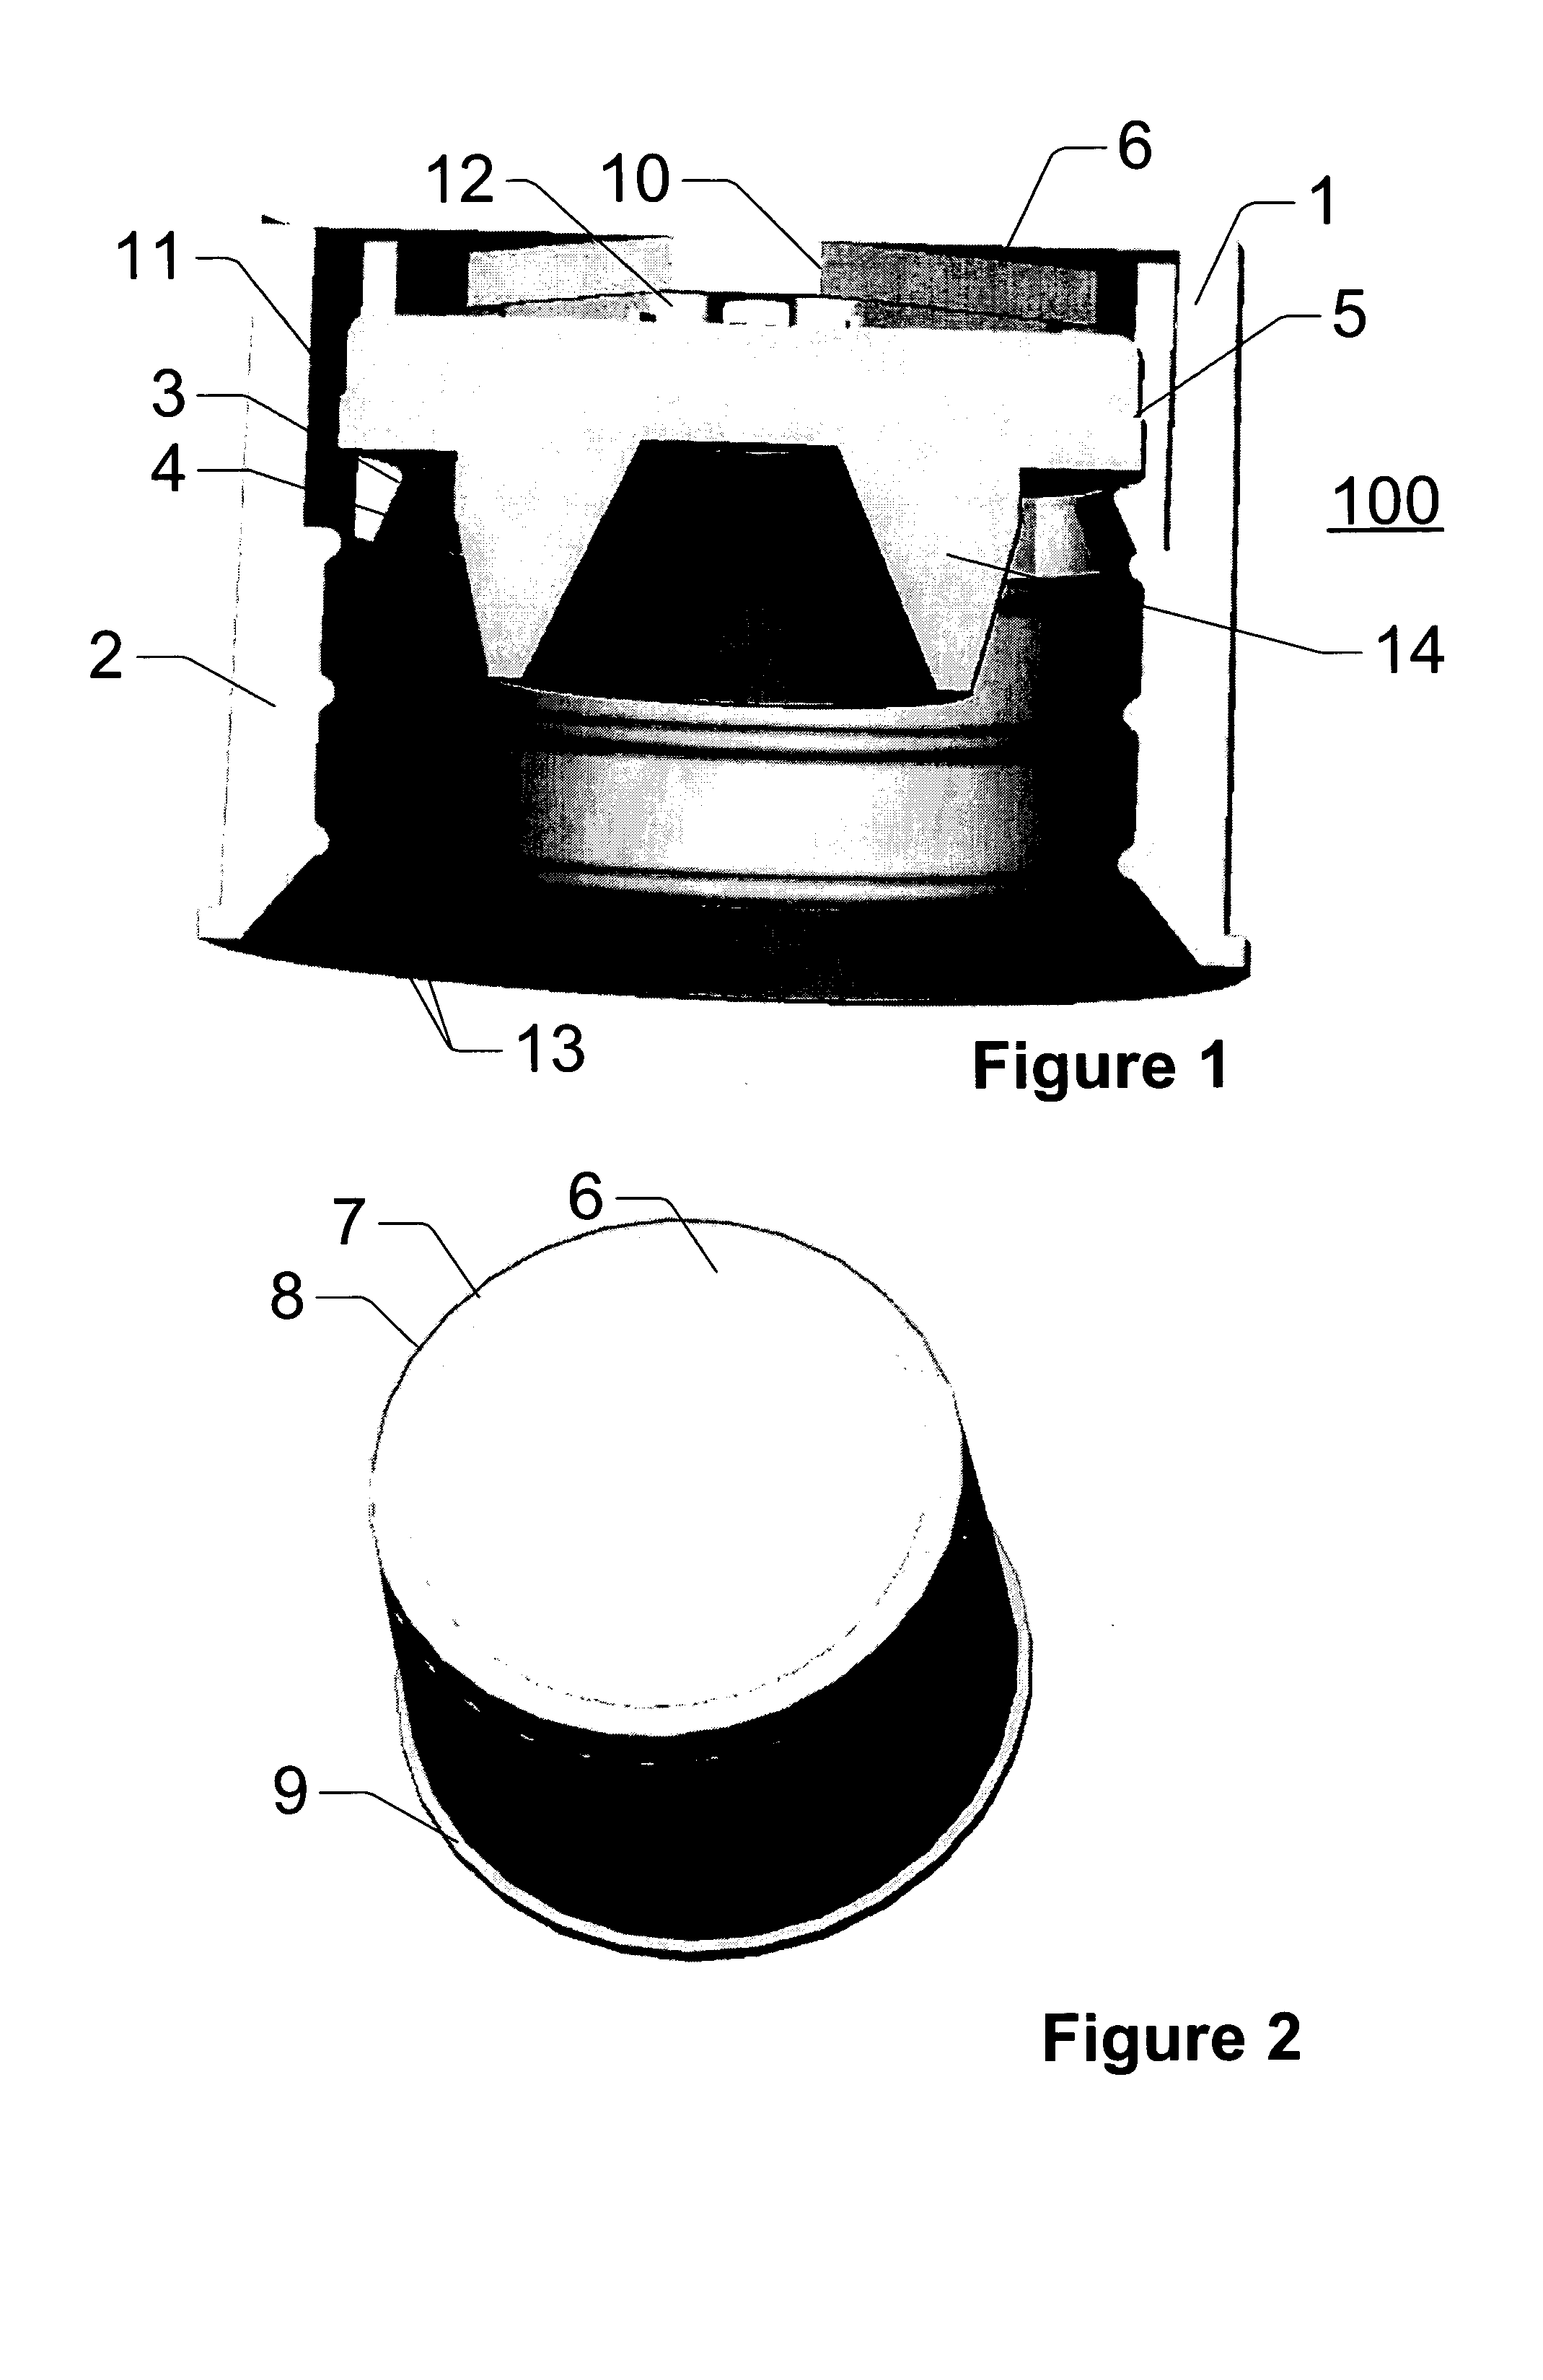 Processing cap assembly for isolating contents of a container